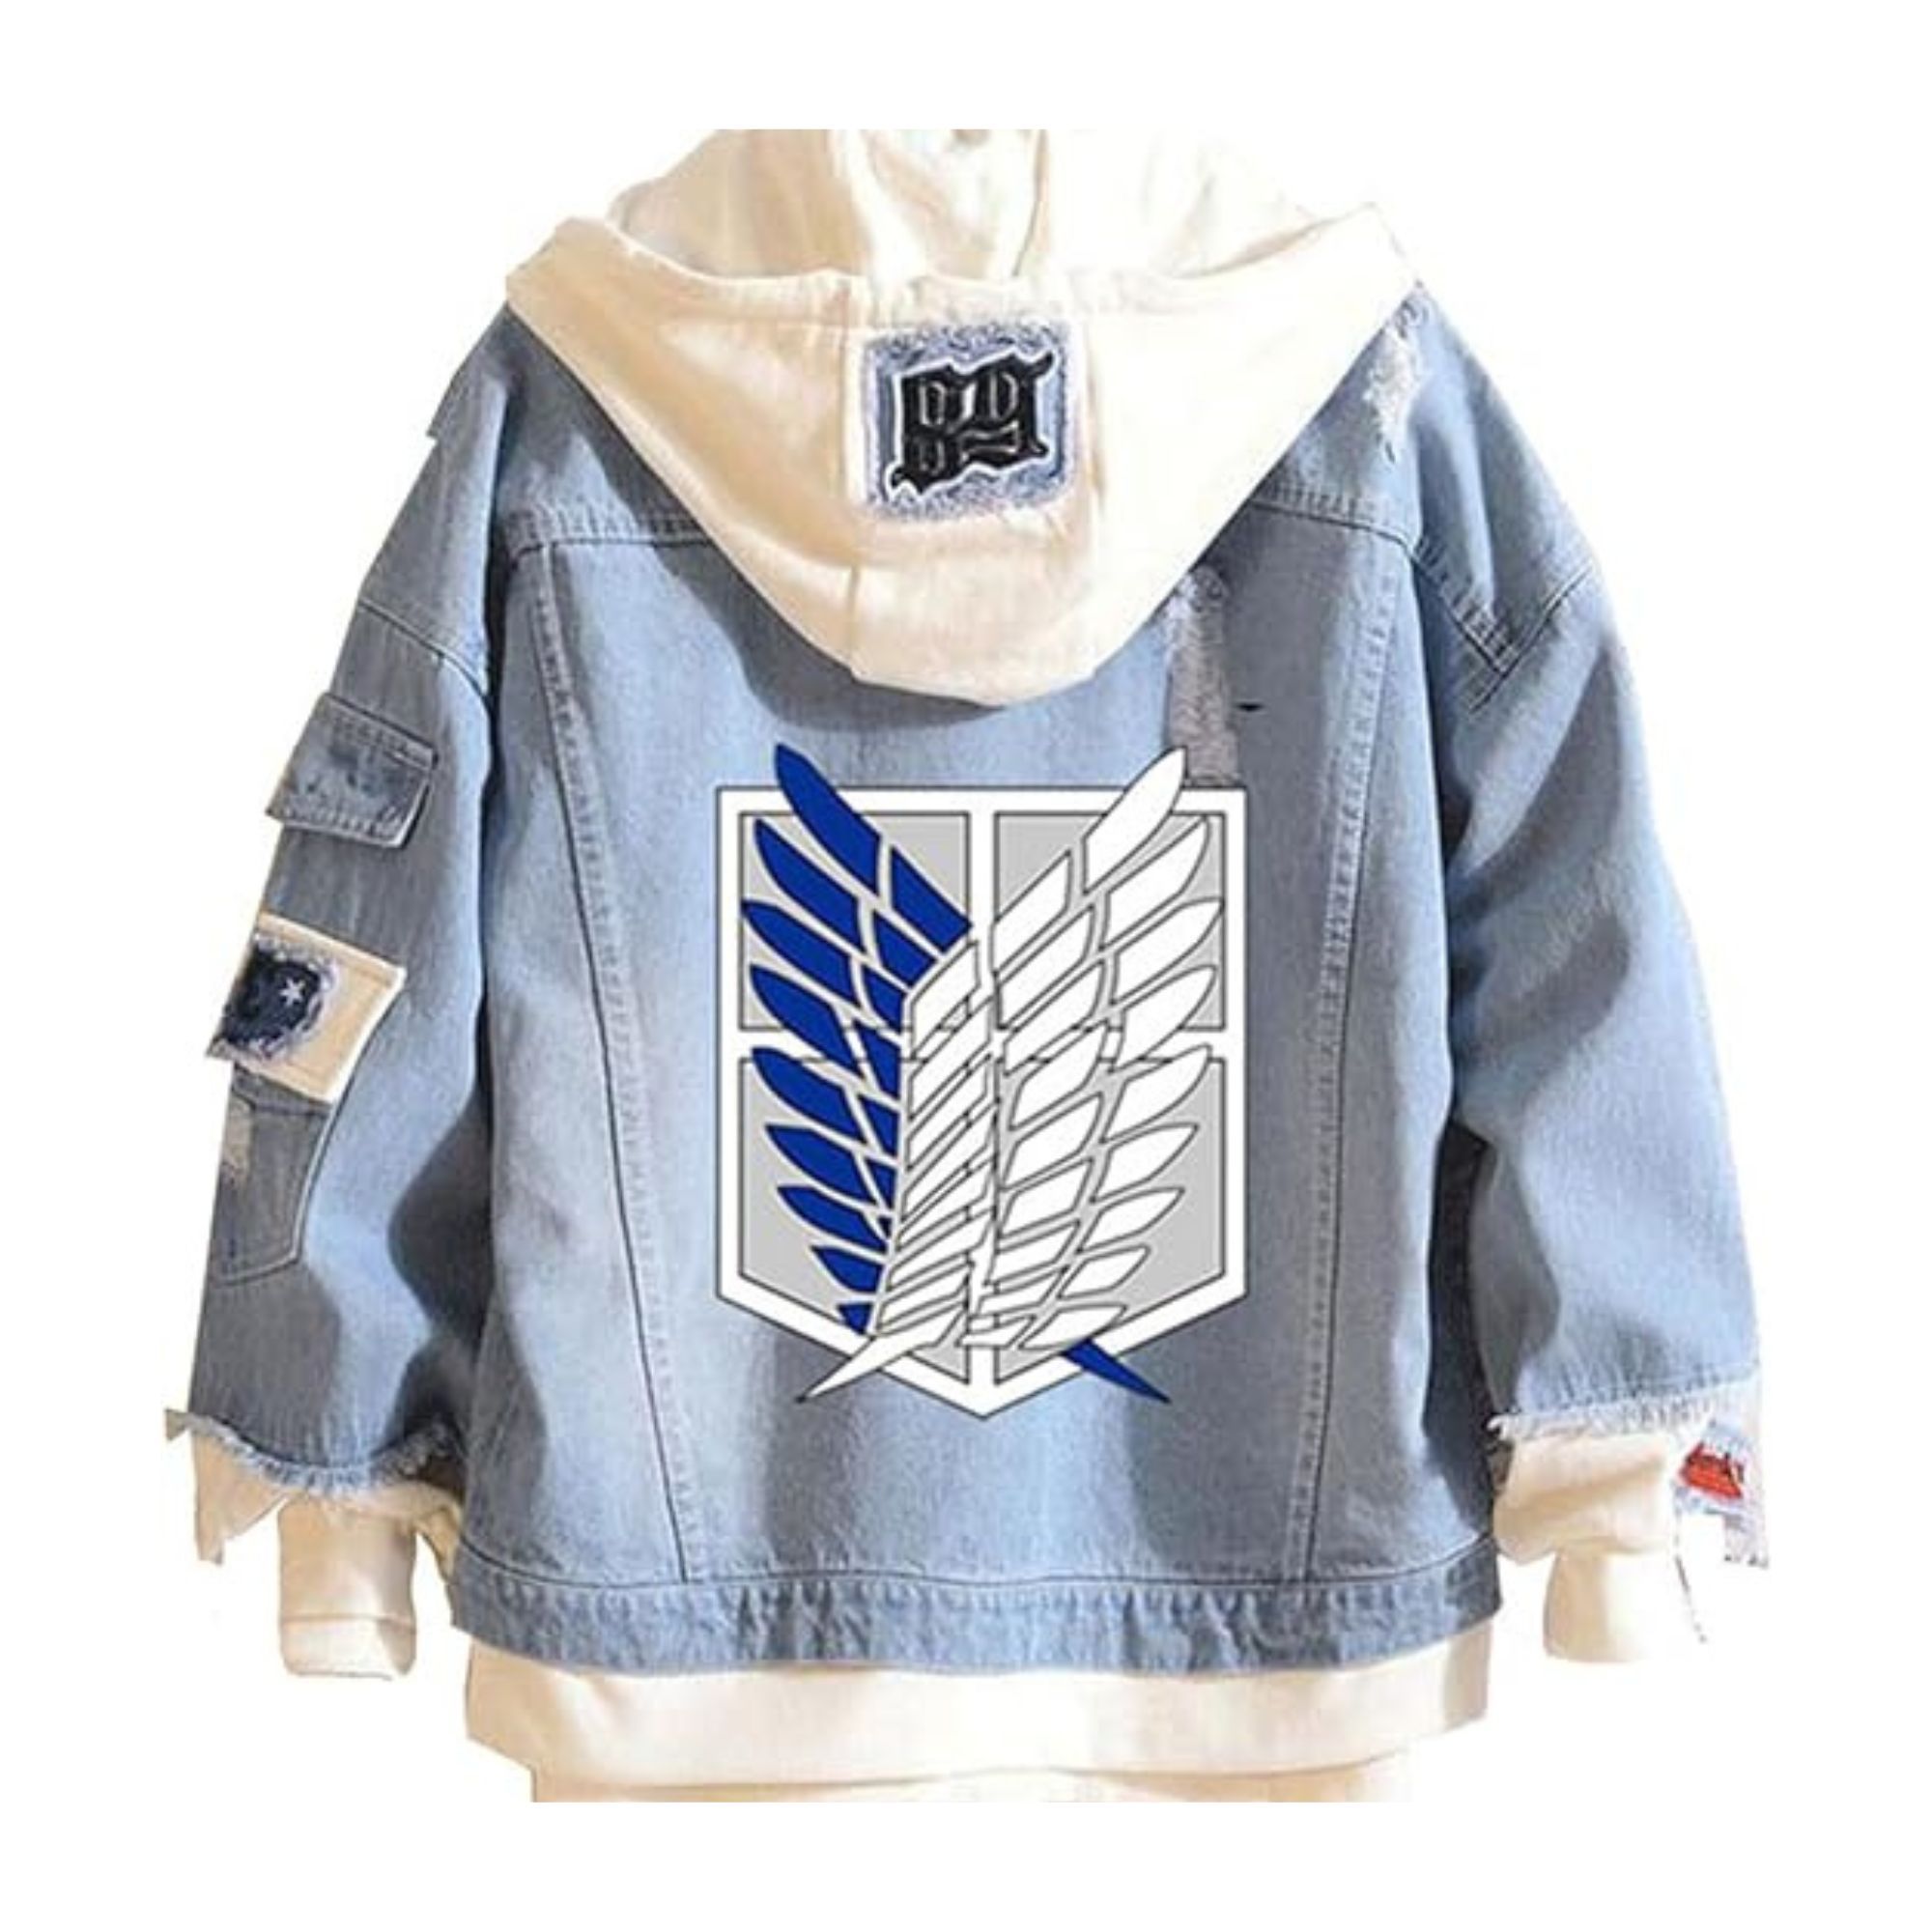 Product still of the Attack On Titan Denim Jacket on a white background